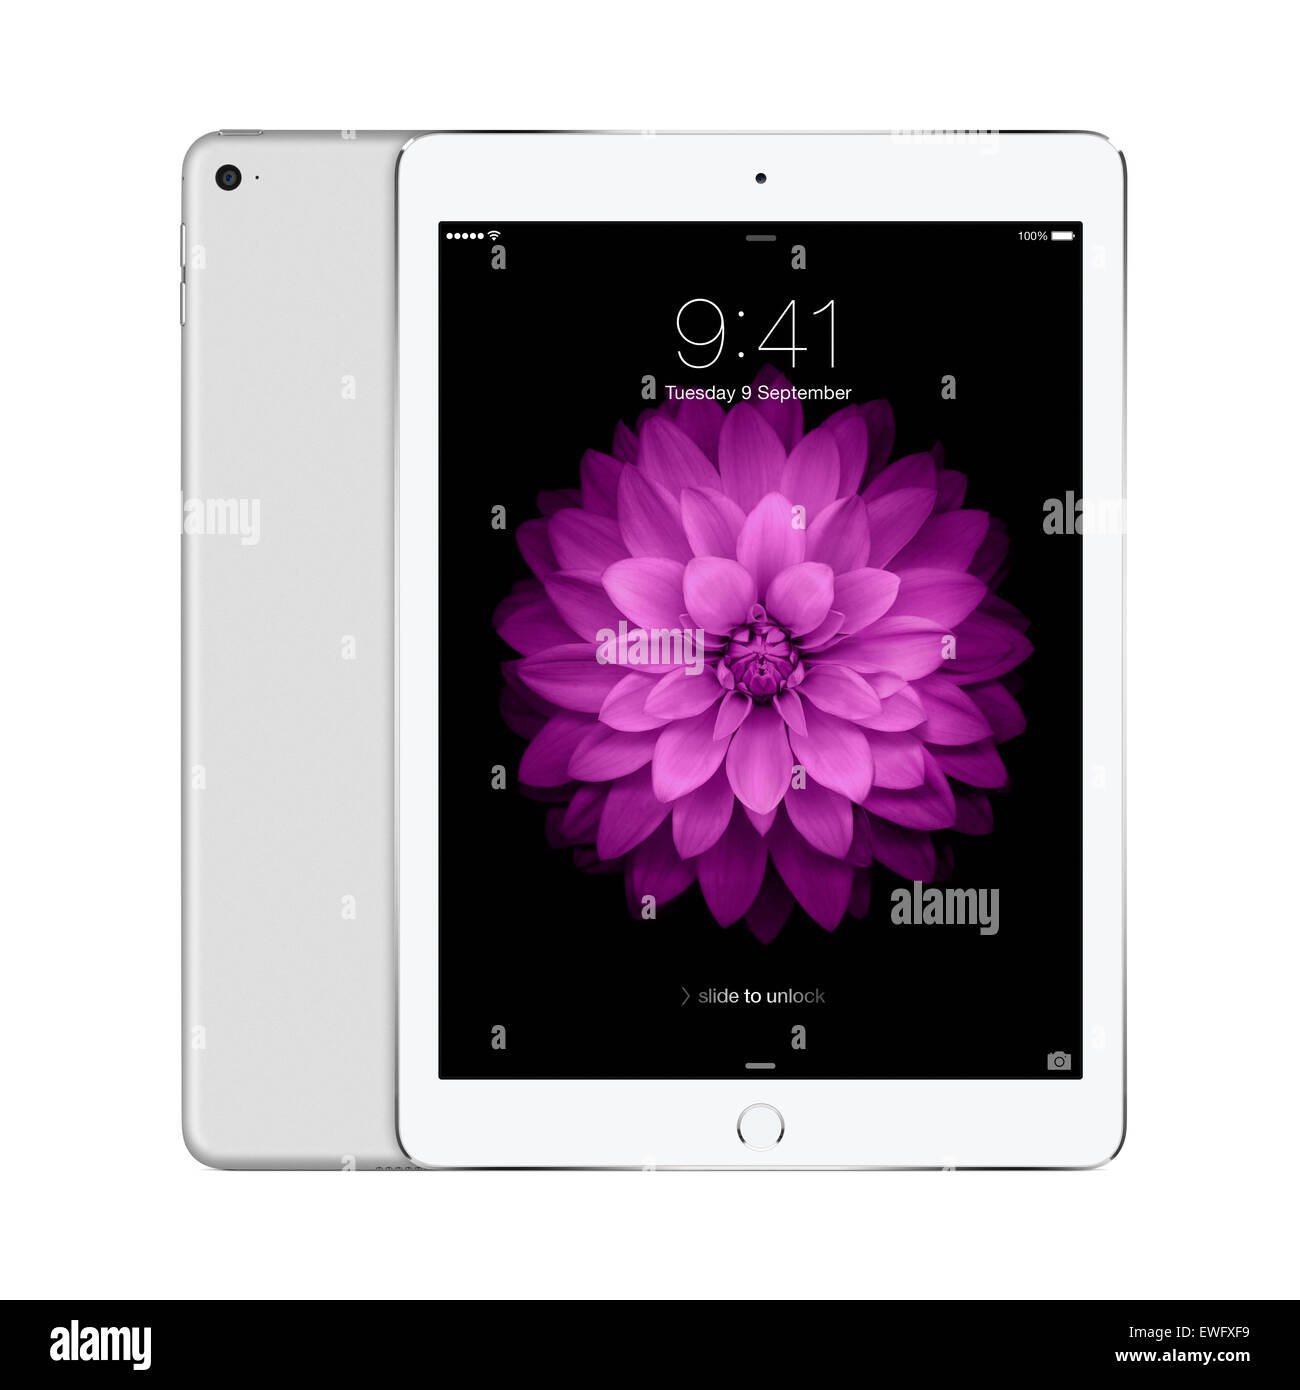 Varna, Bulgaria - February 02, 2014: Front and back sides of Apple Silver iPad Air 2 displaying iOS 8 with lock screen. Stock Photo